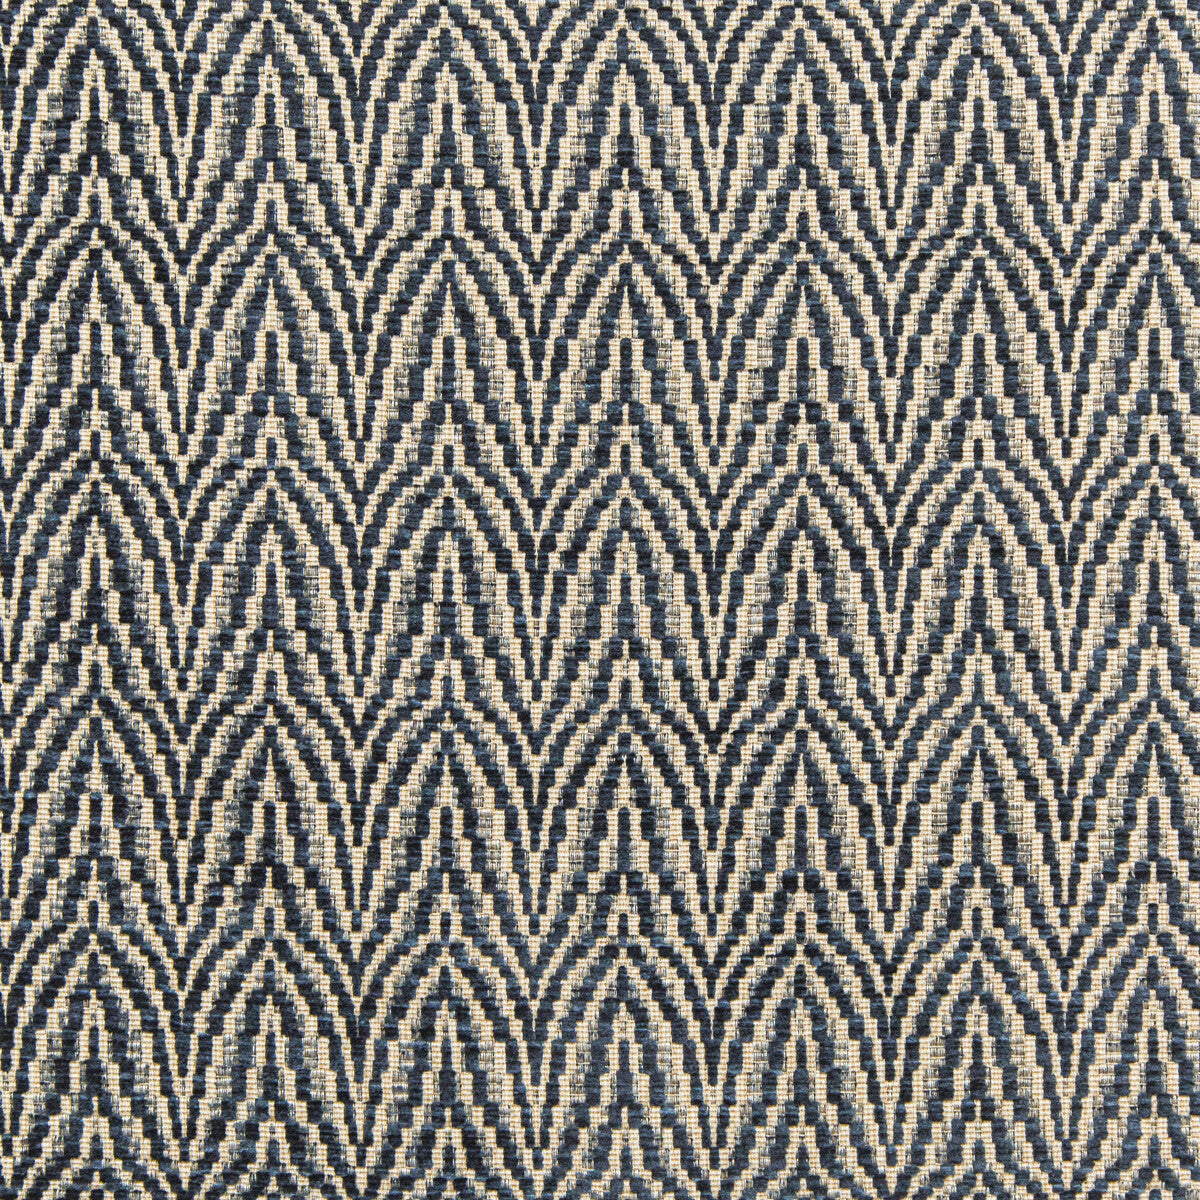 Blyth Weave fabric in slate color - pattern 2020108.511.0 - by Lee Jofa in the Linford Weaves collection